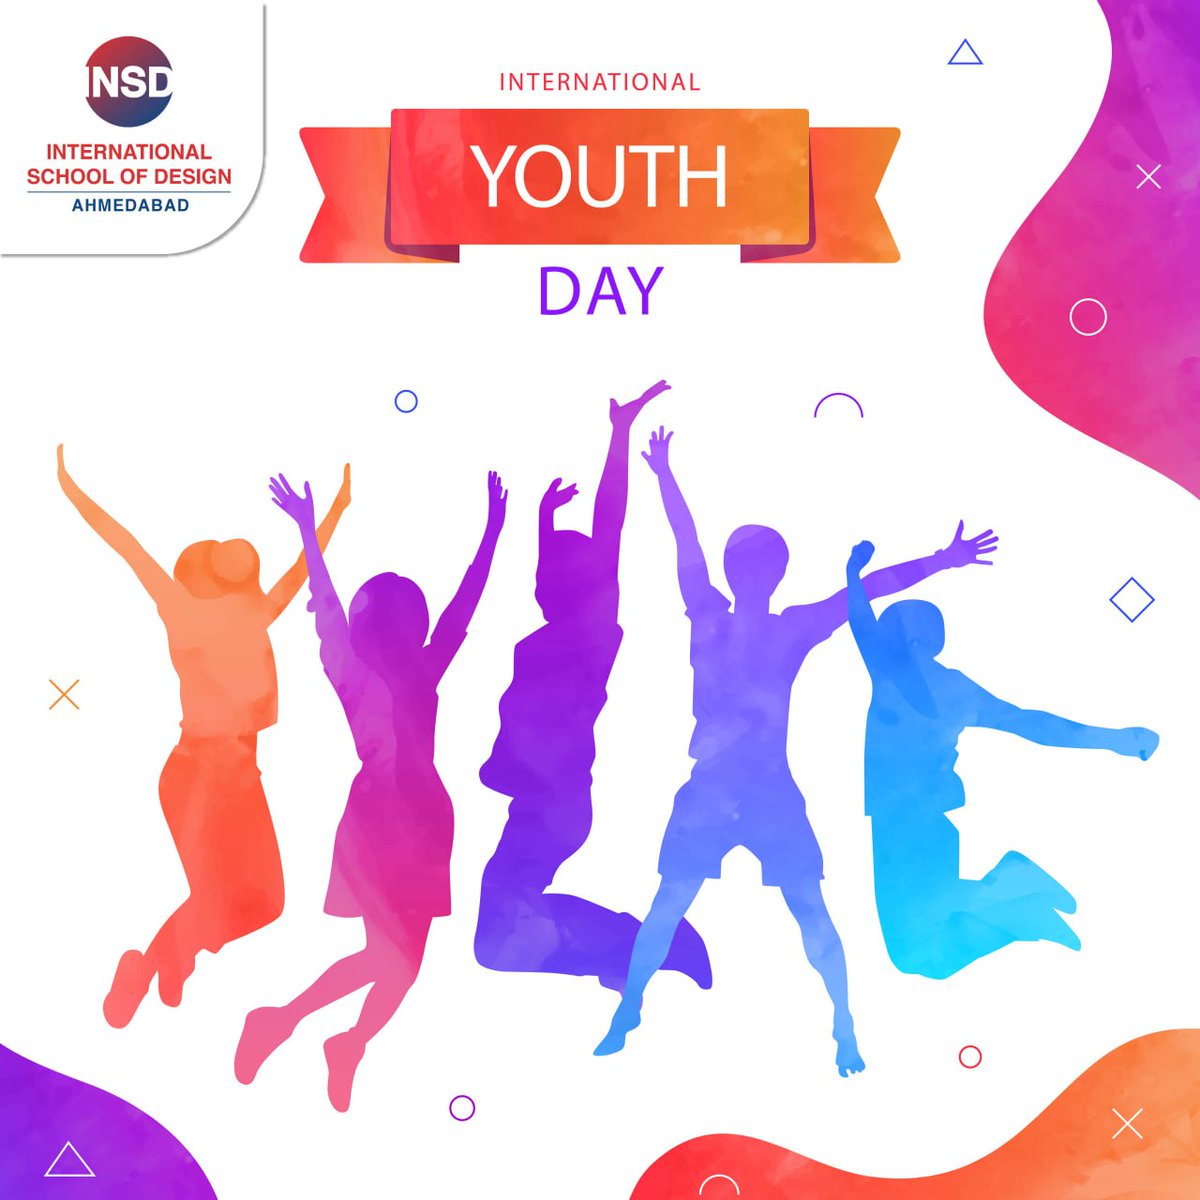 Happy International Youth Day! ✌️⭐️🌈 Remember, you have the power to shape a brighter, more colorful future. Keep designing, keep inspiring, and keep being the incredible force that you are! 💡🎨 #InternationalYouthDay #studentsofinsd #YouthfulCreativity #DesignYourFuture